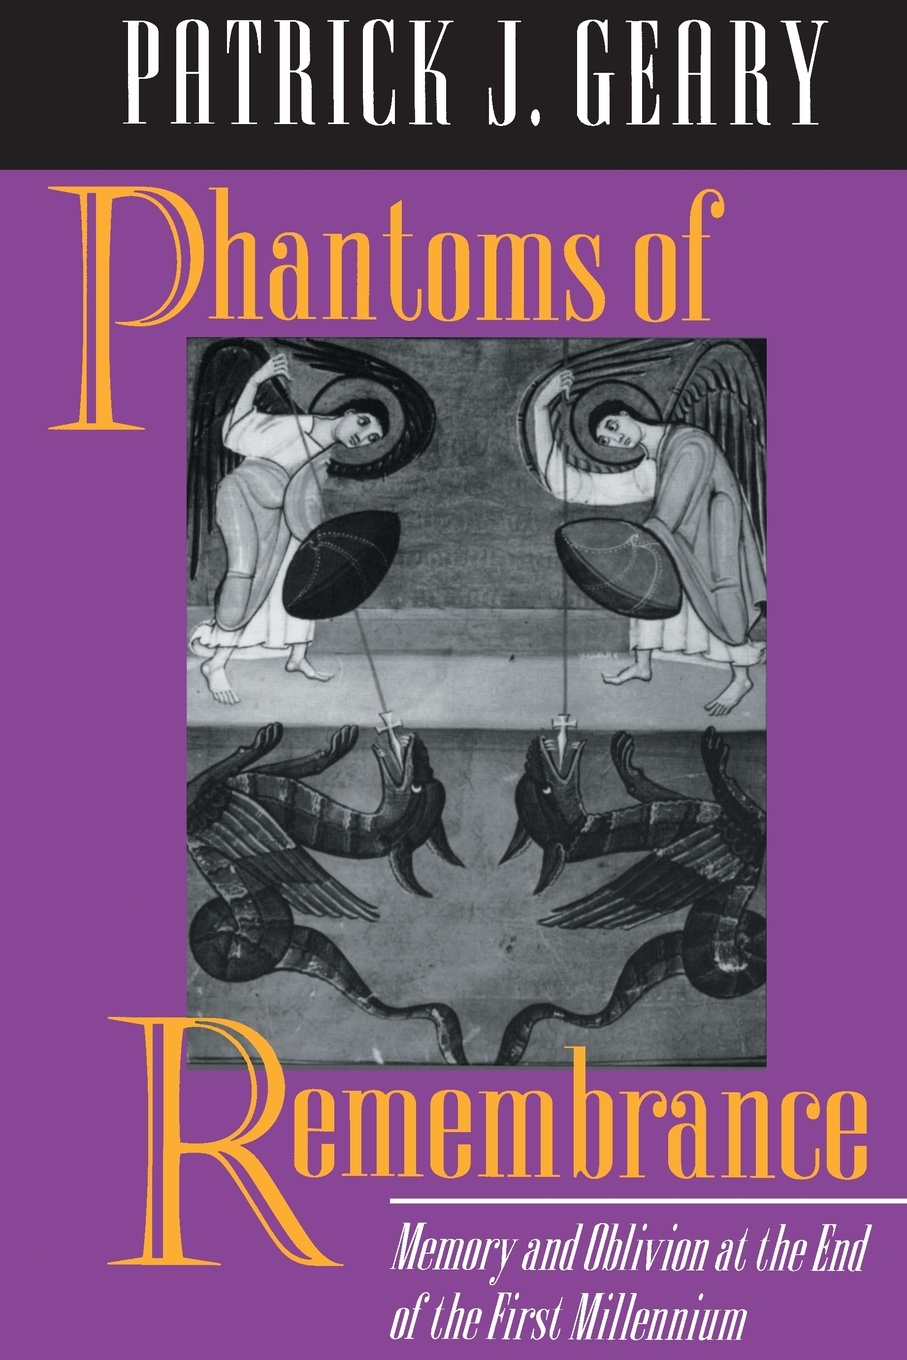 Phantoms of Remembrance. Memory and Oblivion at the End of the First Millennium